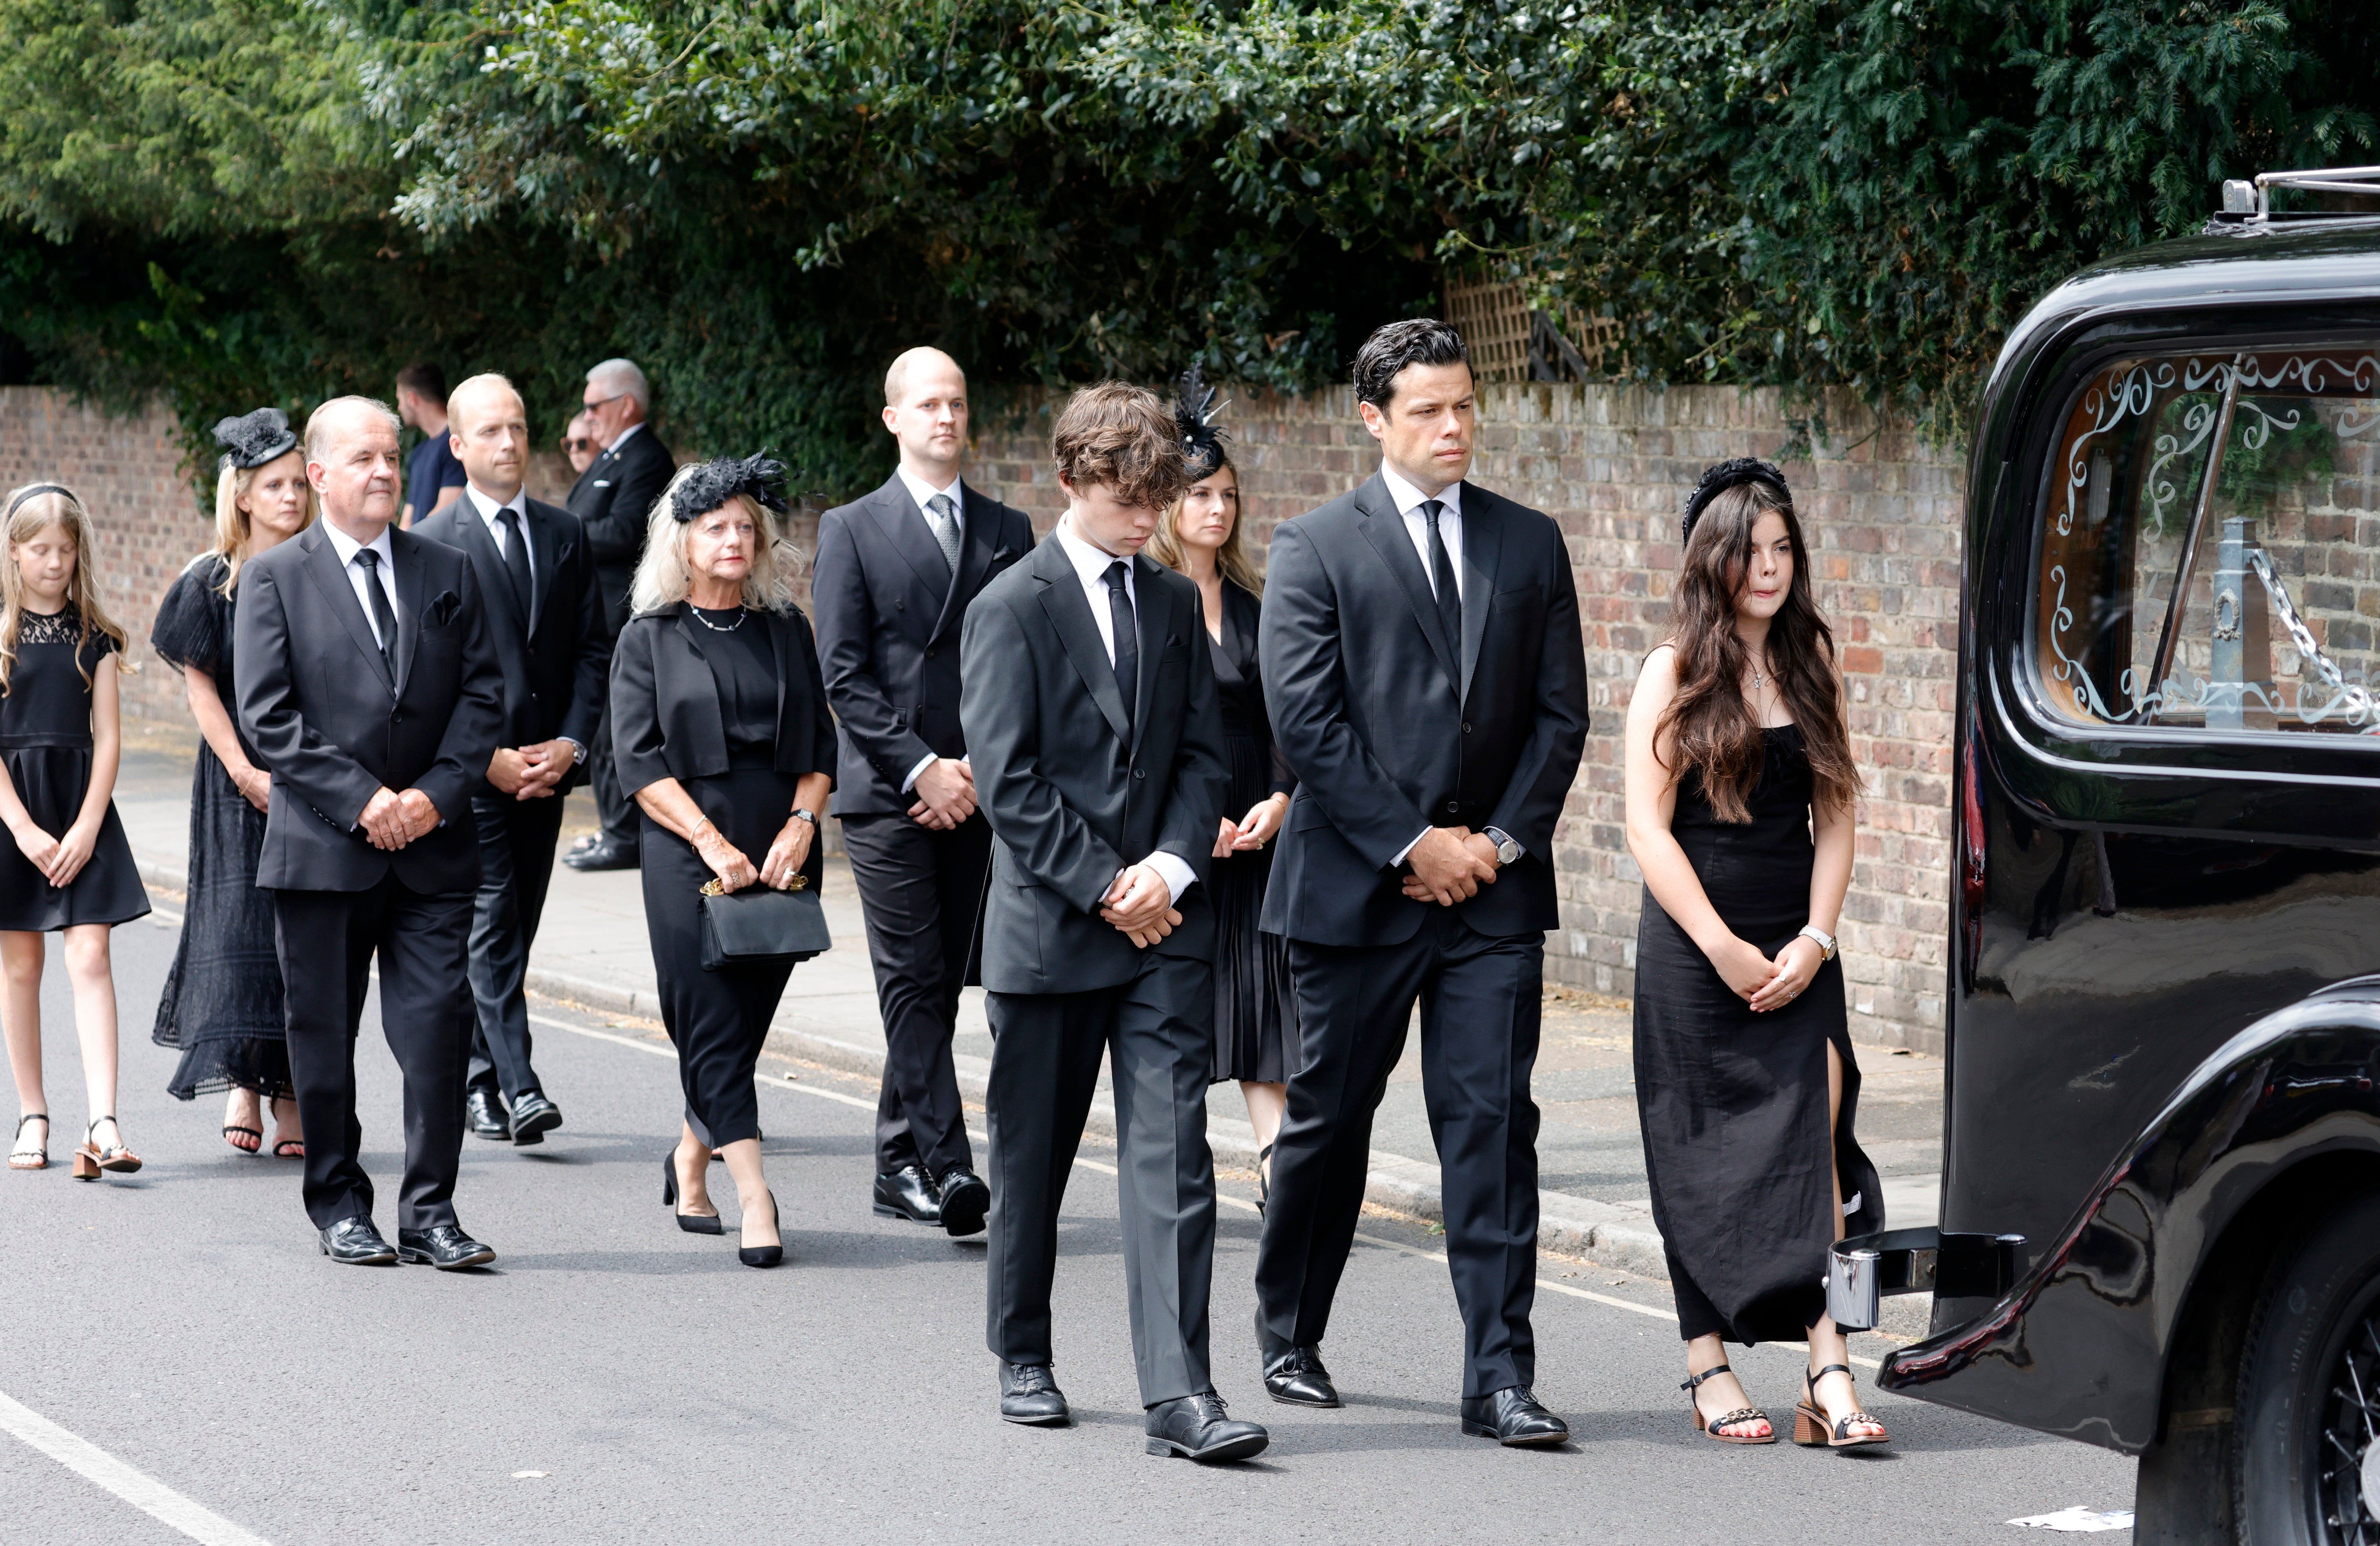 Hugo Bowen, Sebastien Bowen and Eloise Bowen lead the procession with (L-R second row) parents Alistair James, Heather James and brother Ben James during the funeral of Dame Deborah James at St Mary's Church